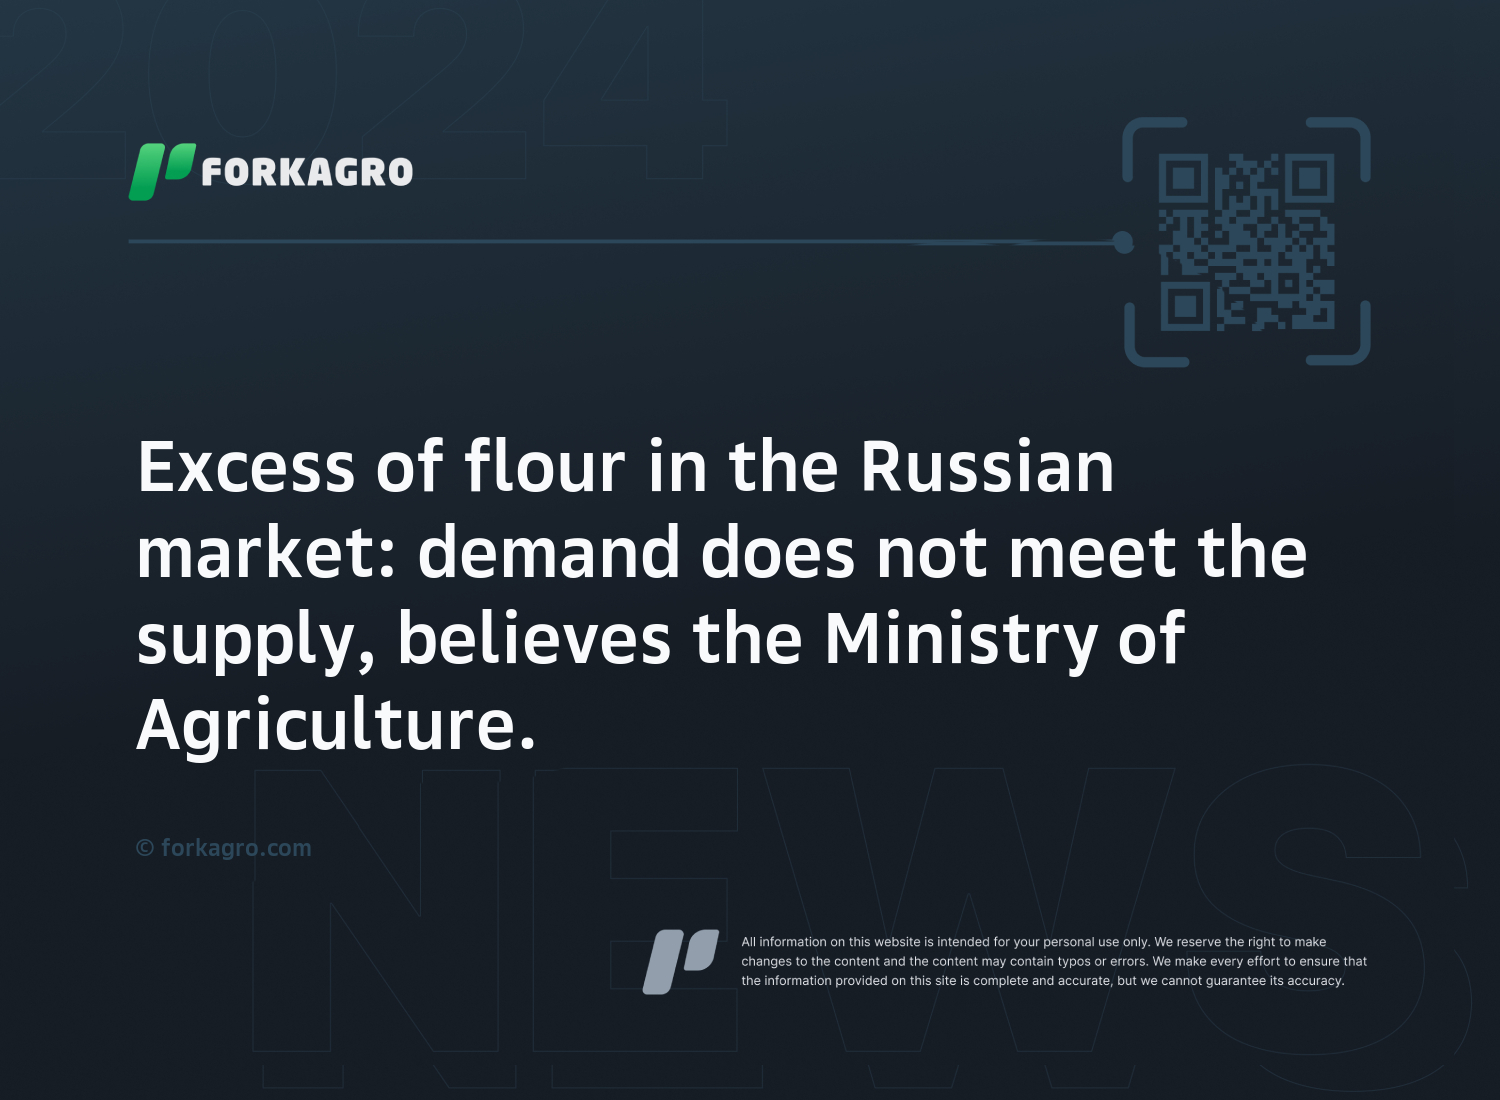 Excess of flour in the Russian market: demand does not meet the supply, believes the Ministry of Agriculture.